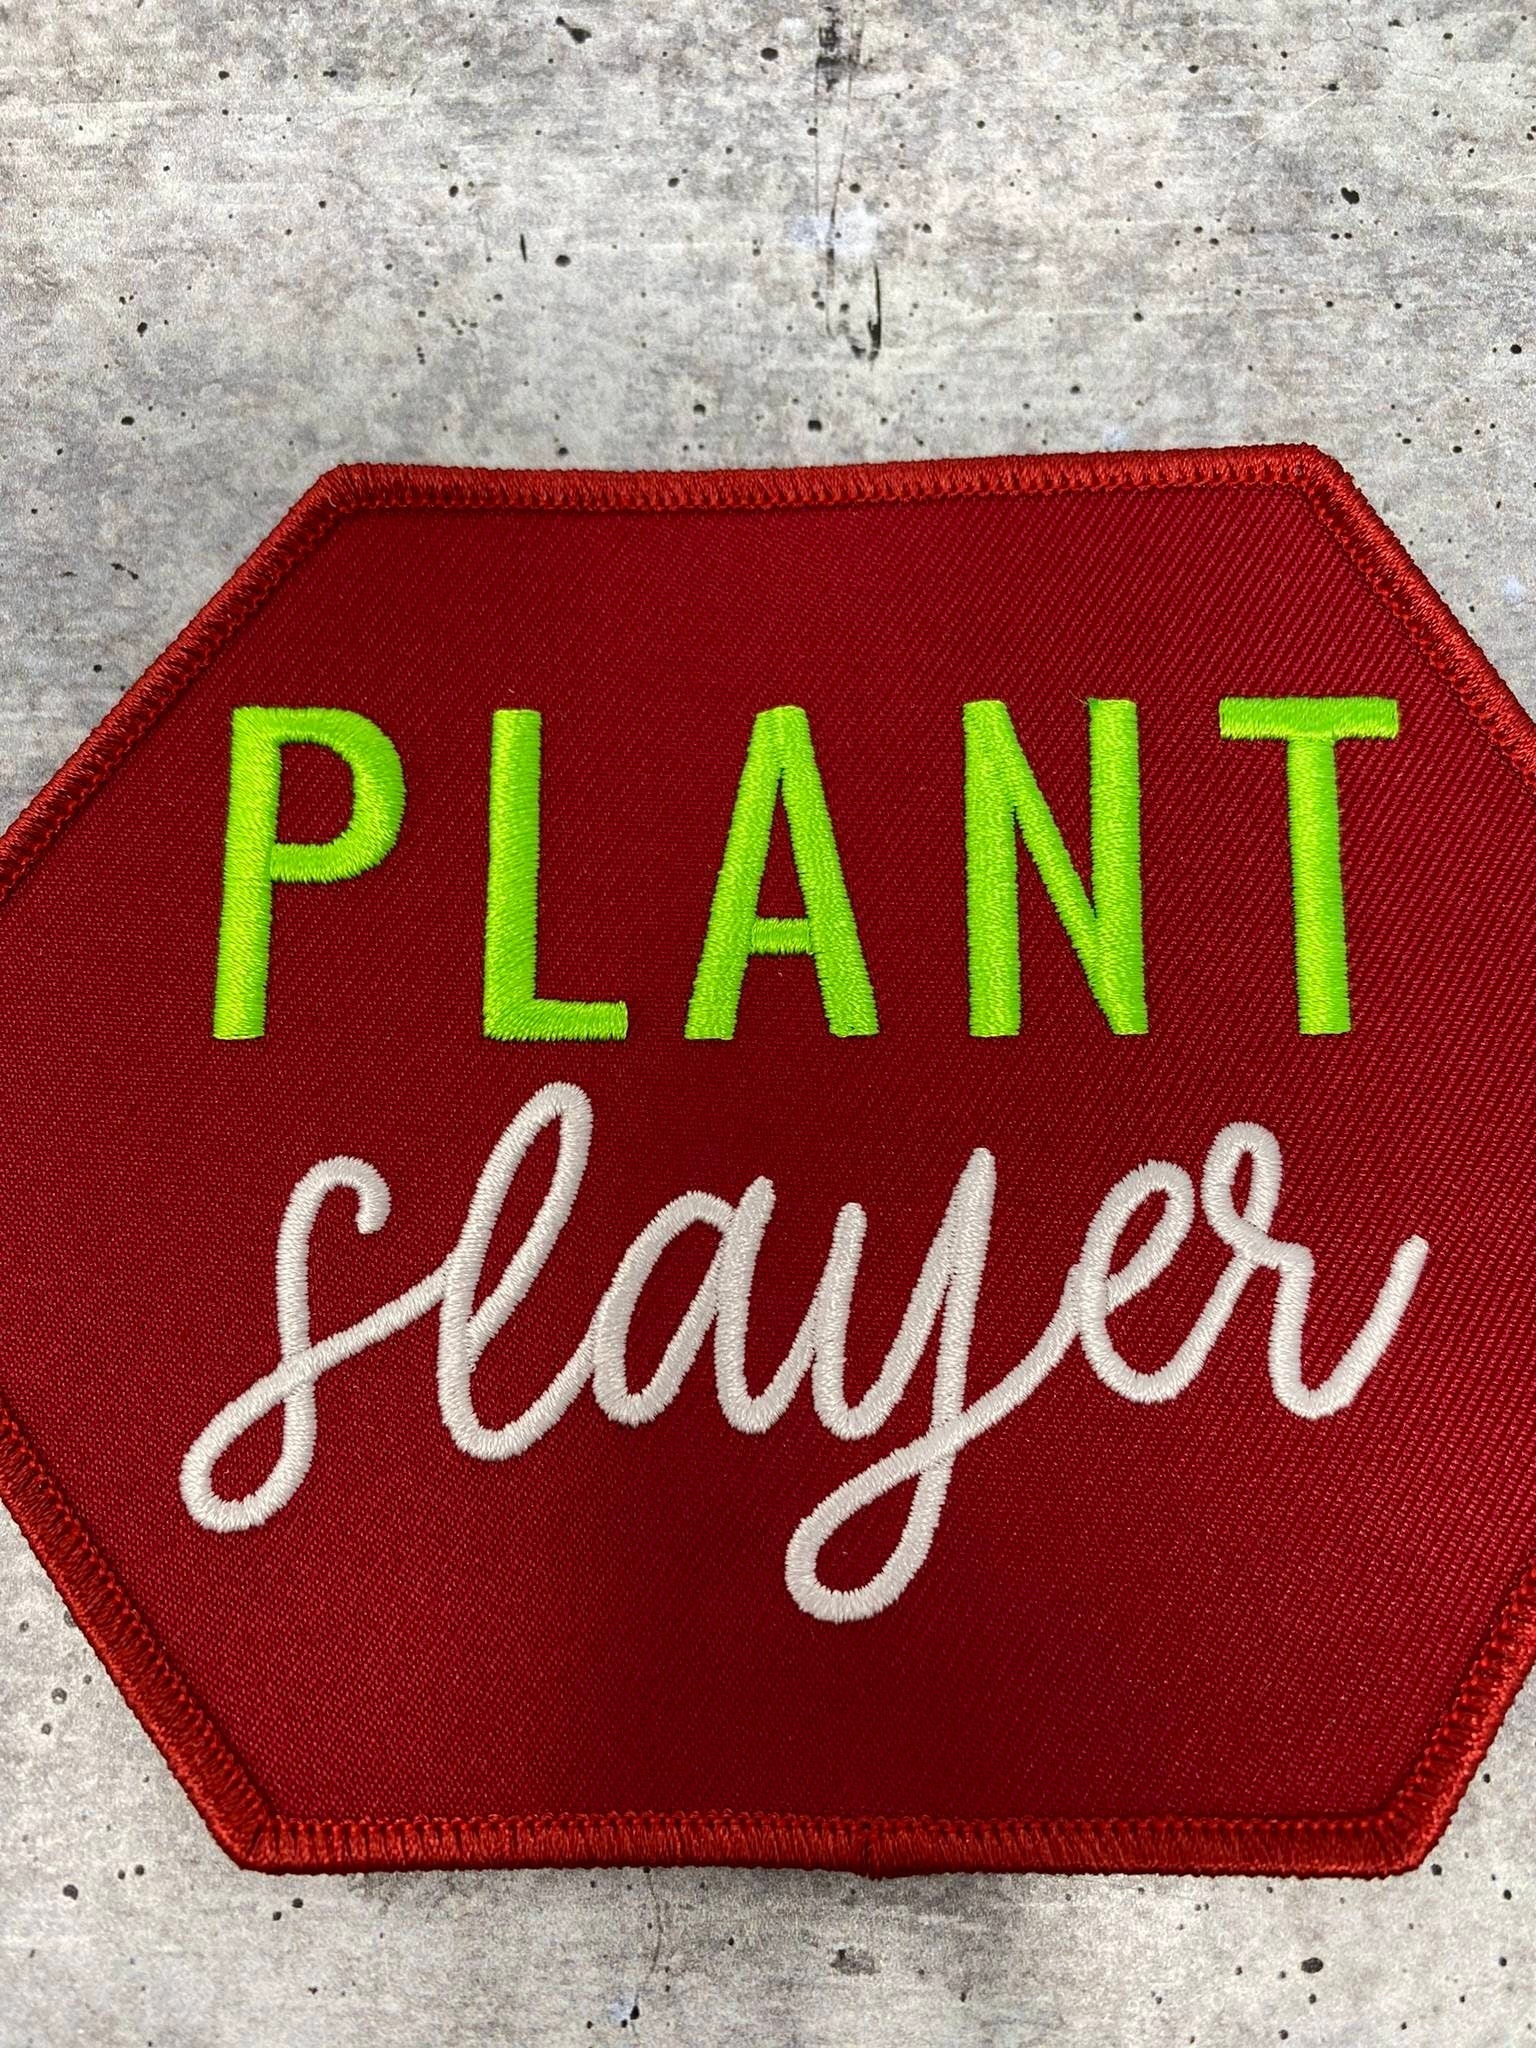 Vegan Collection: New, 1-pc, "Plant Slayer", Sz 4"x4", Iron-on Embroidered Patch, Gift for Vegans, Cute Patch Jackets, Hats